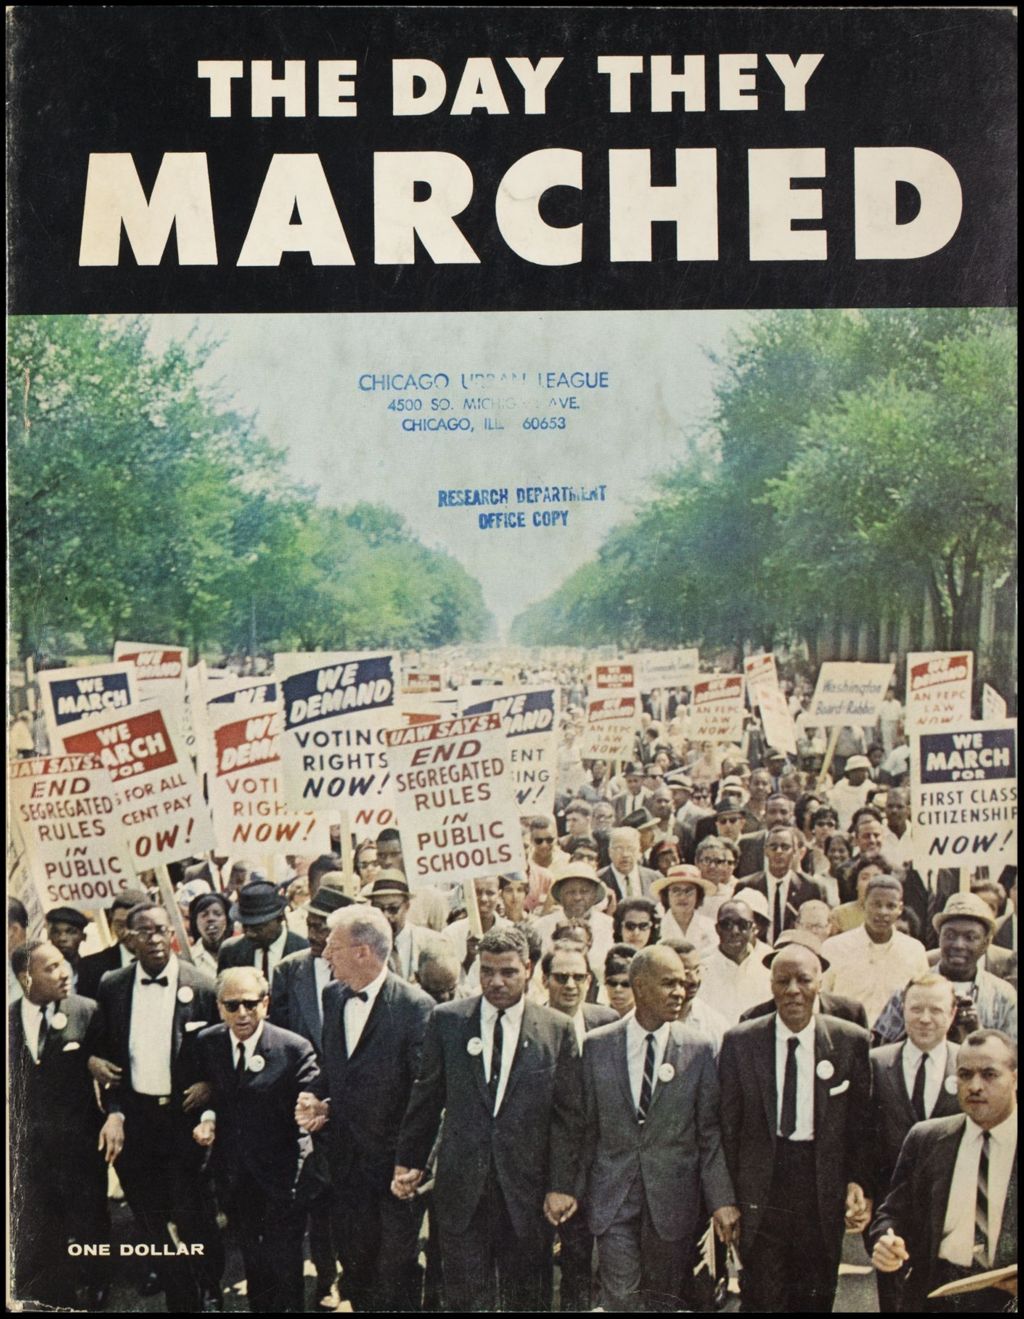 Miniature of The Day they Marched, 1963 (Folder III-2931)